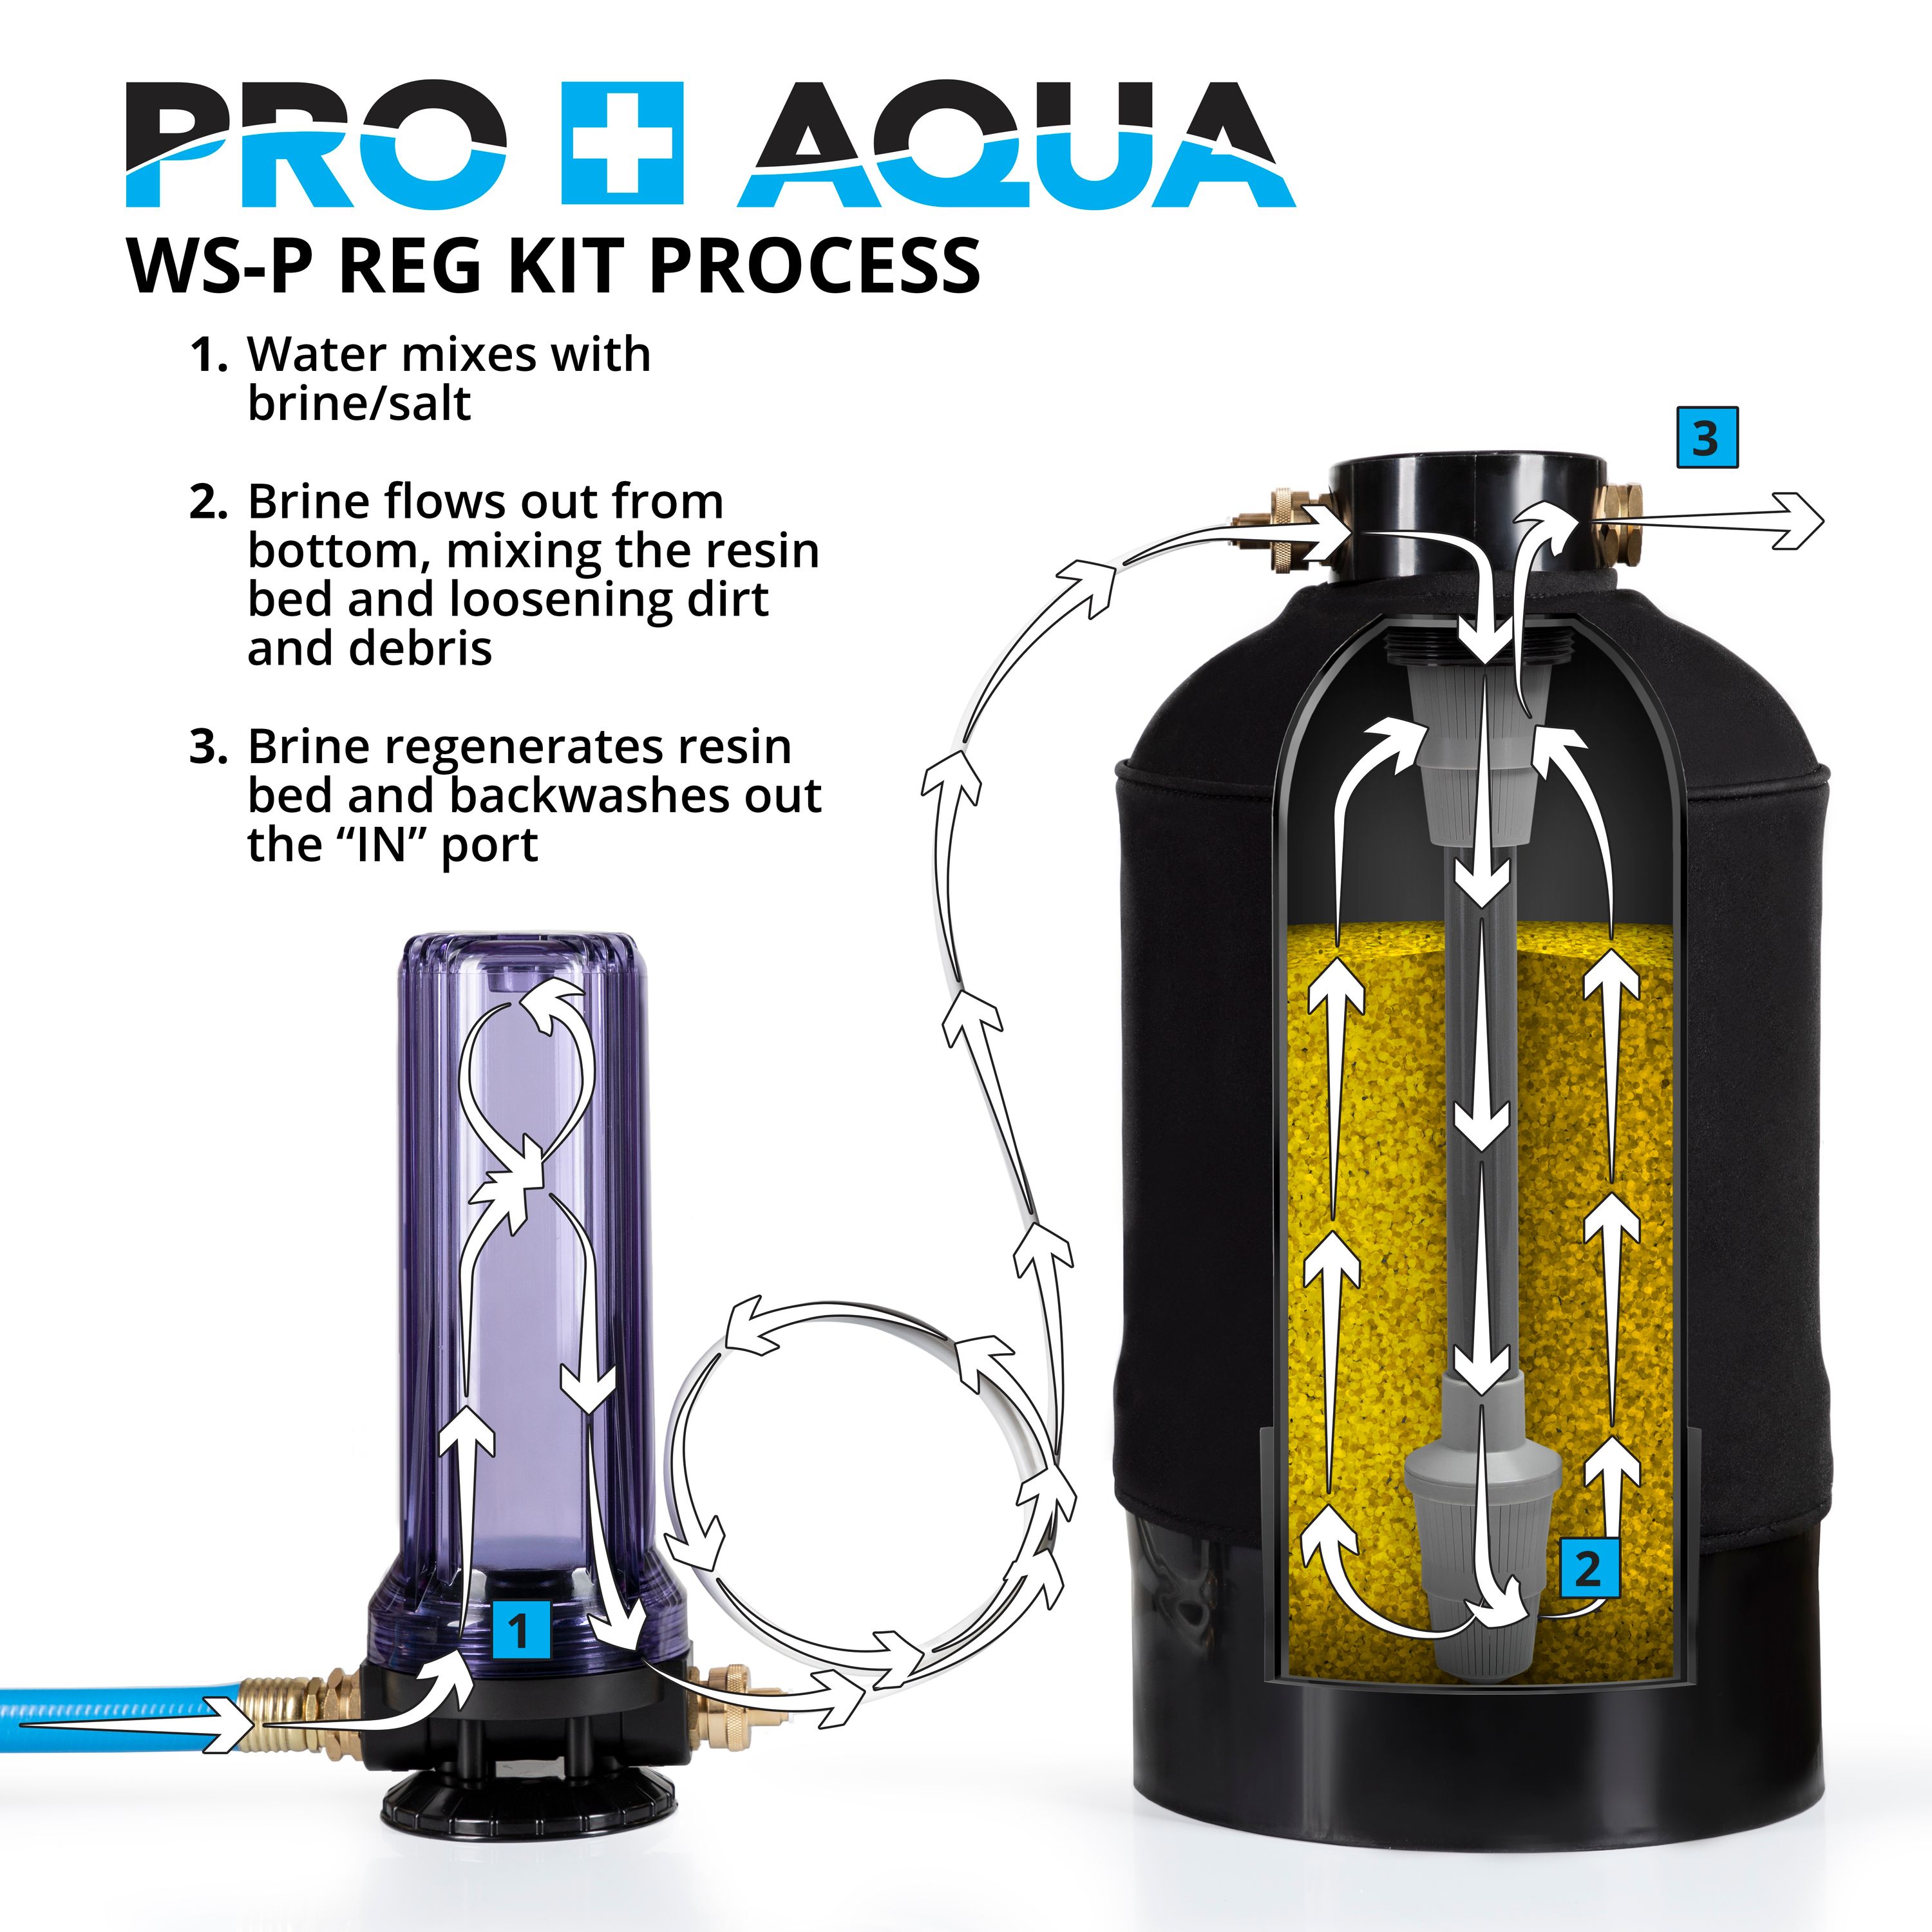 Pre-Filter Regeneration Kit for Portable Water Softeners